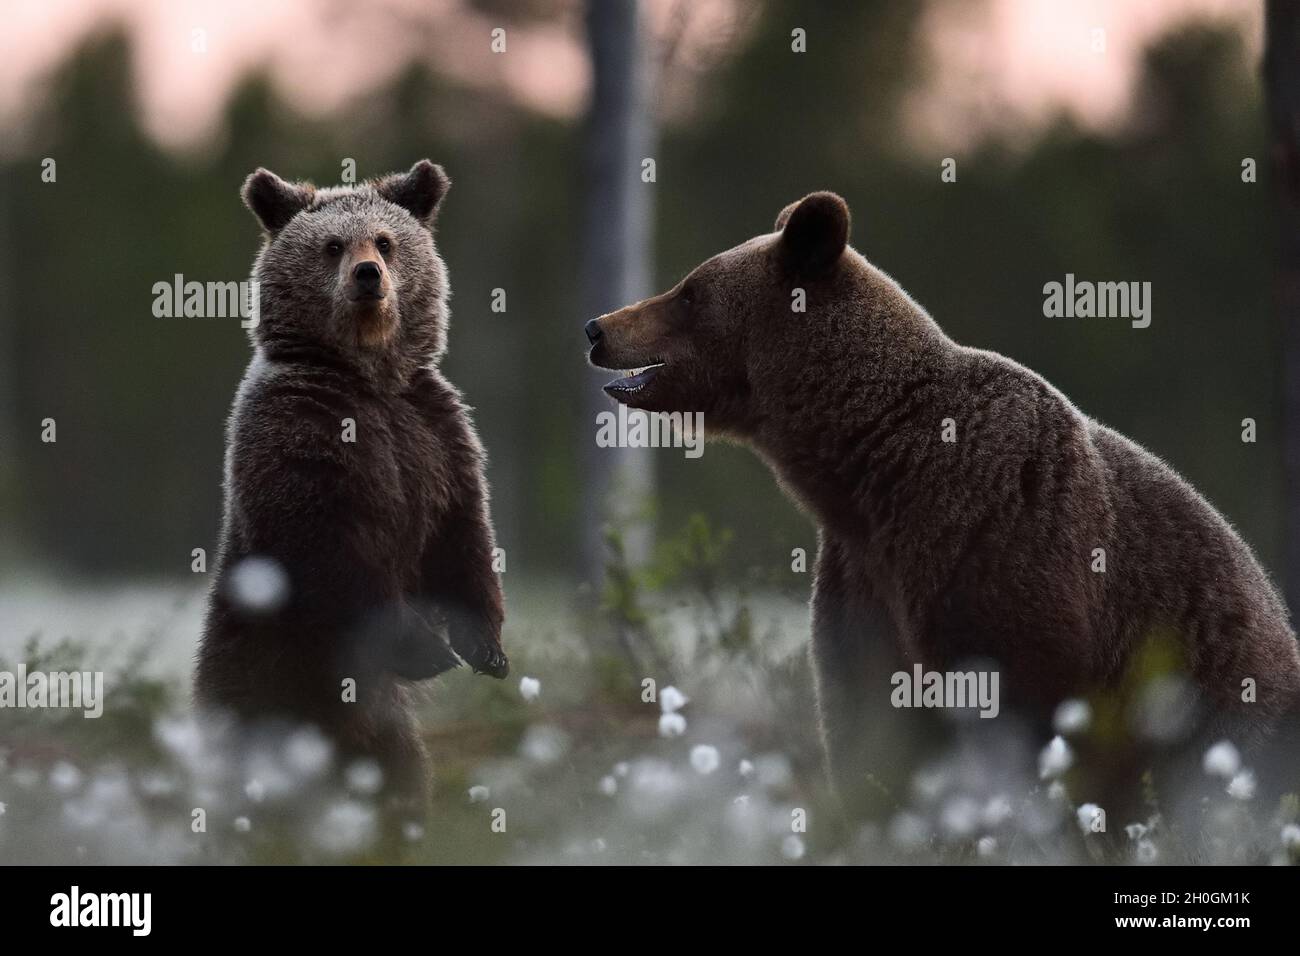 Brown bear with a cub Stock Photo